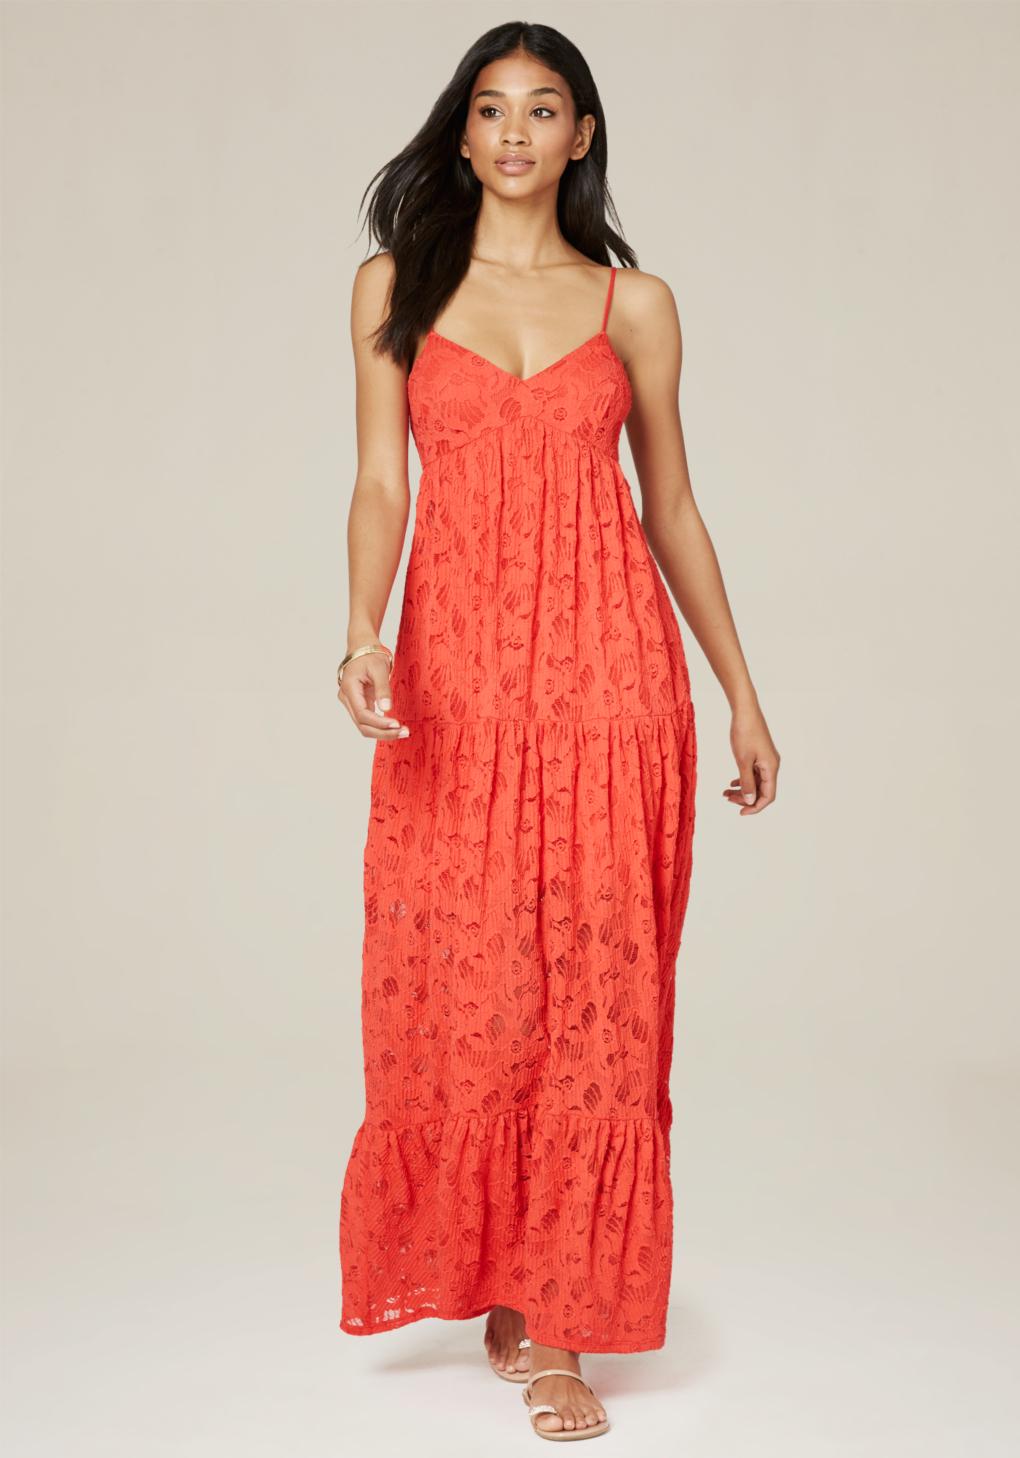 Lyst - Bebe Lace Tiered Maxi Dress in Red